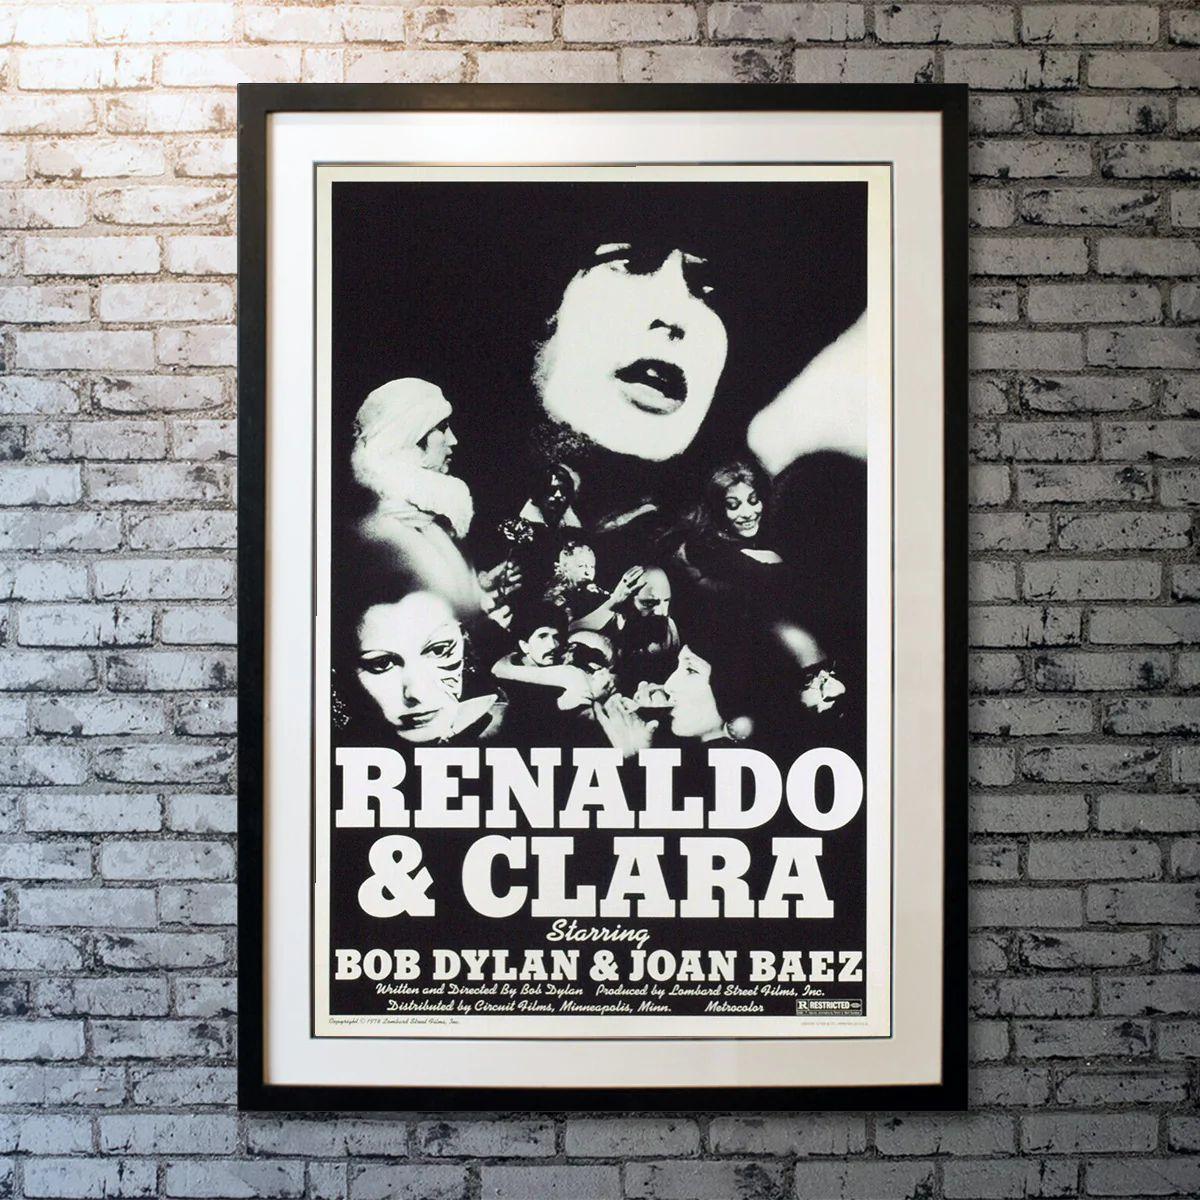 Renaldo and Clara, Unframed Poster, 1978

Original One Sheet (27 X 41 Inches). Bob Dylan on tour with the Rolling Thunder Revue in 1975; concert footage, documentary interviews and bizarre improvised character scenes.

Year: 1978
Nationality: United